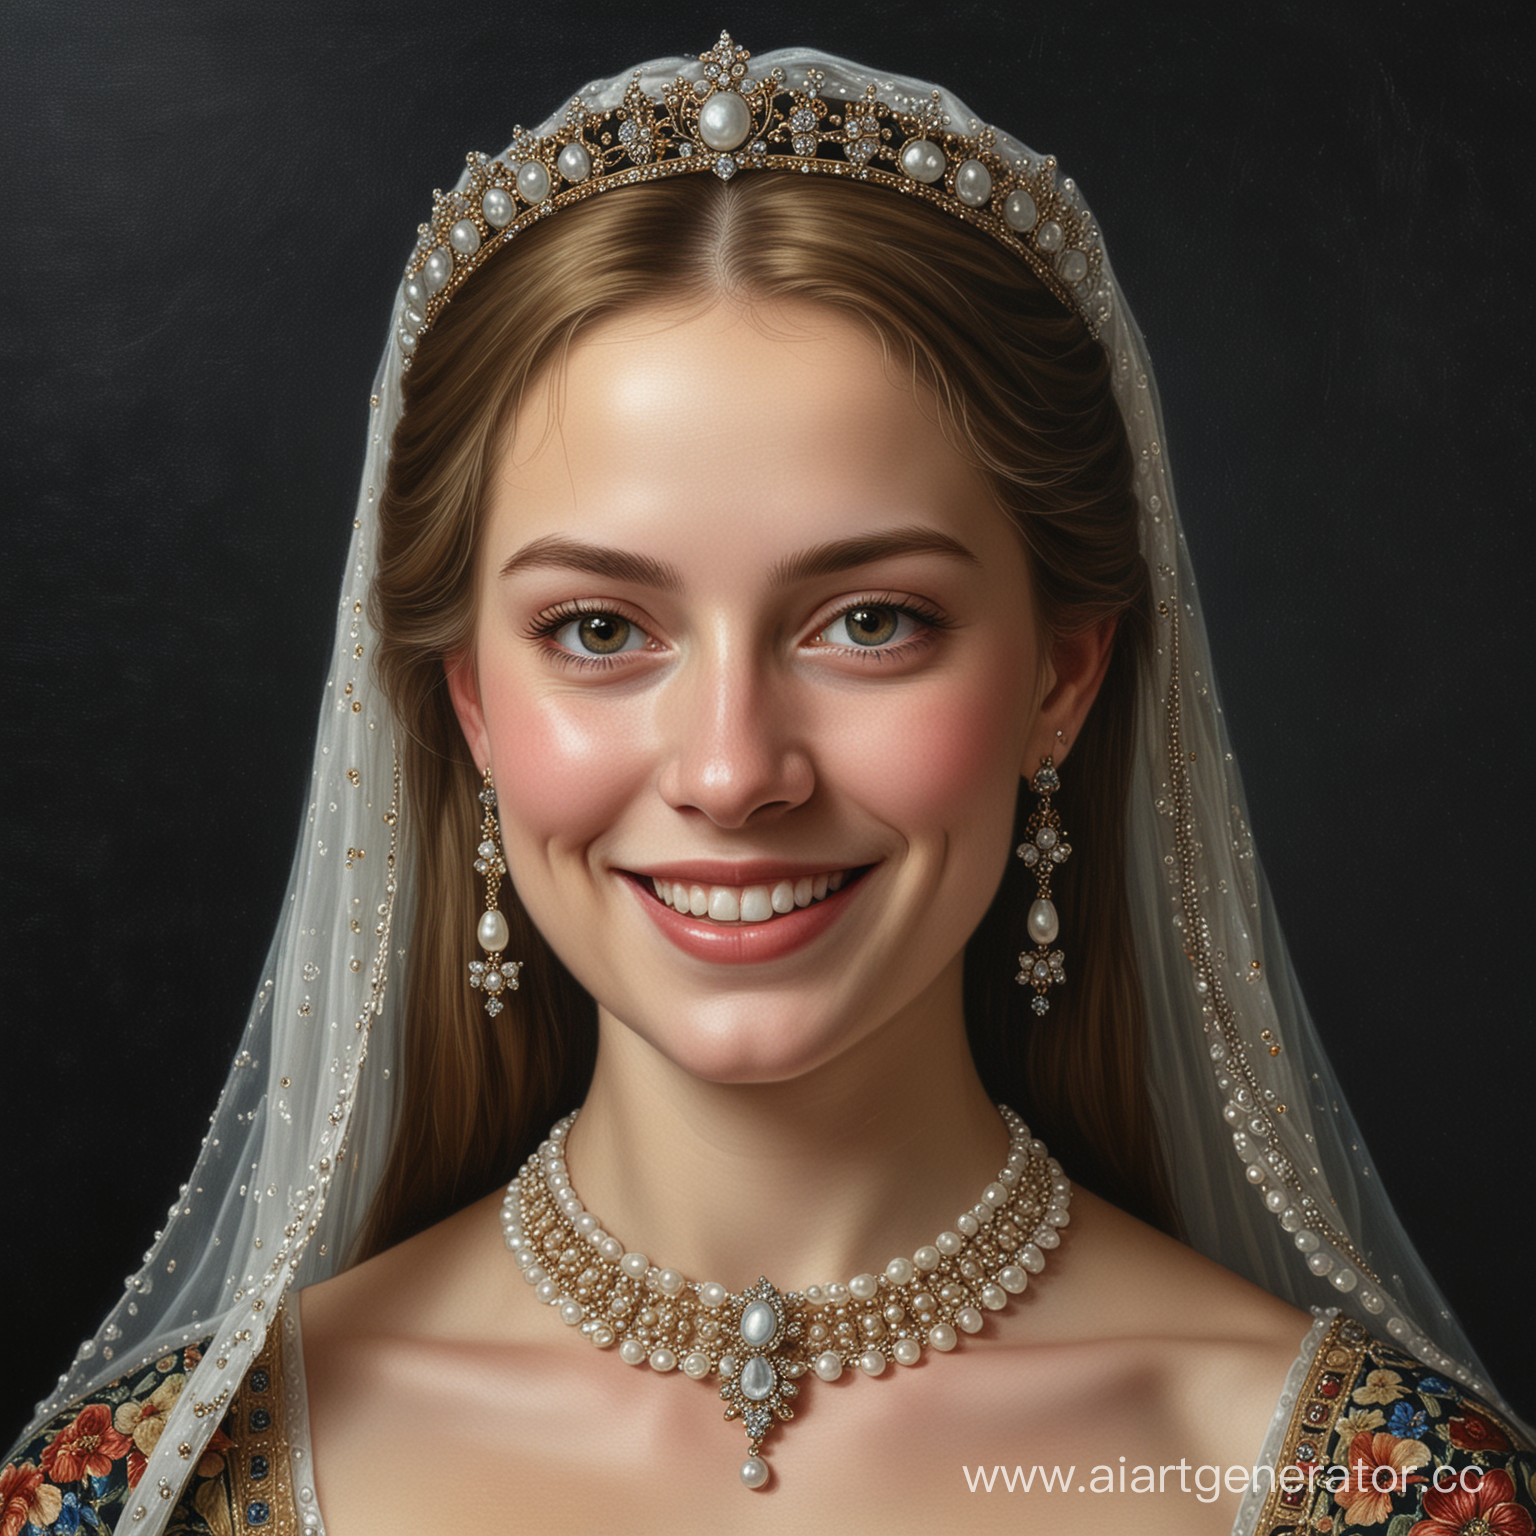 Detailed oil painting on a dark background: The Royal daughter, a smiling 15th century woman in pearl jewelry, stands with flowers.